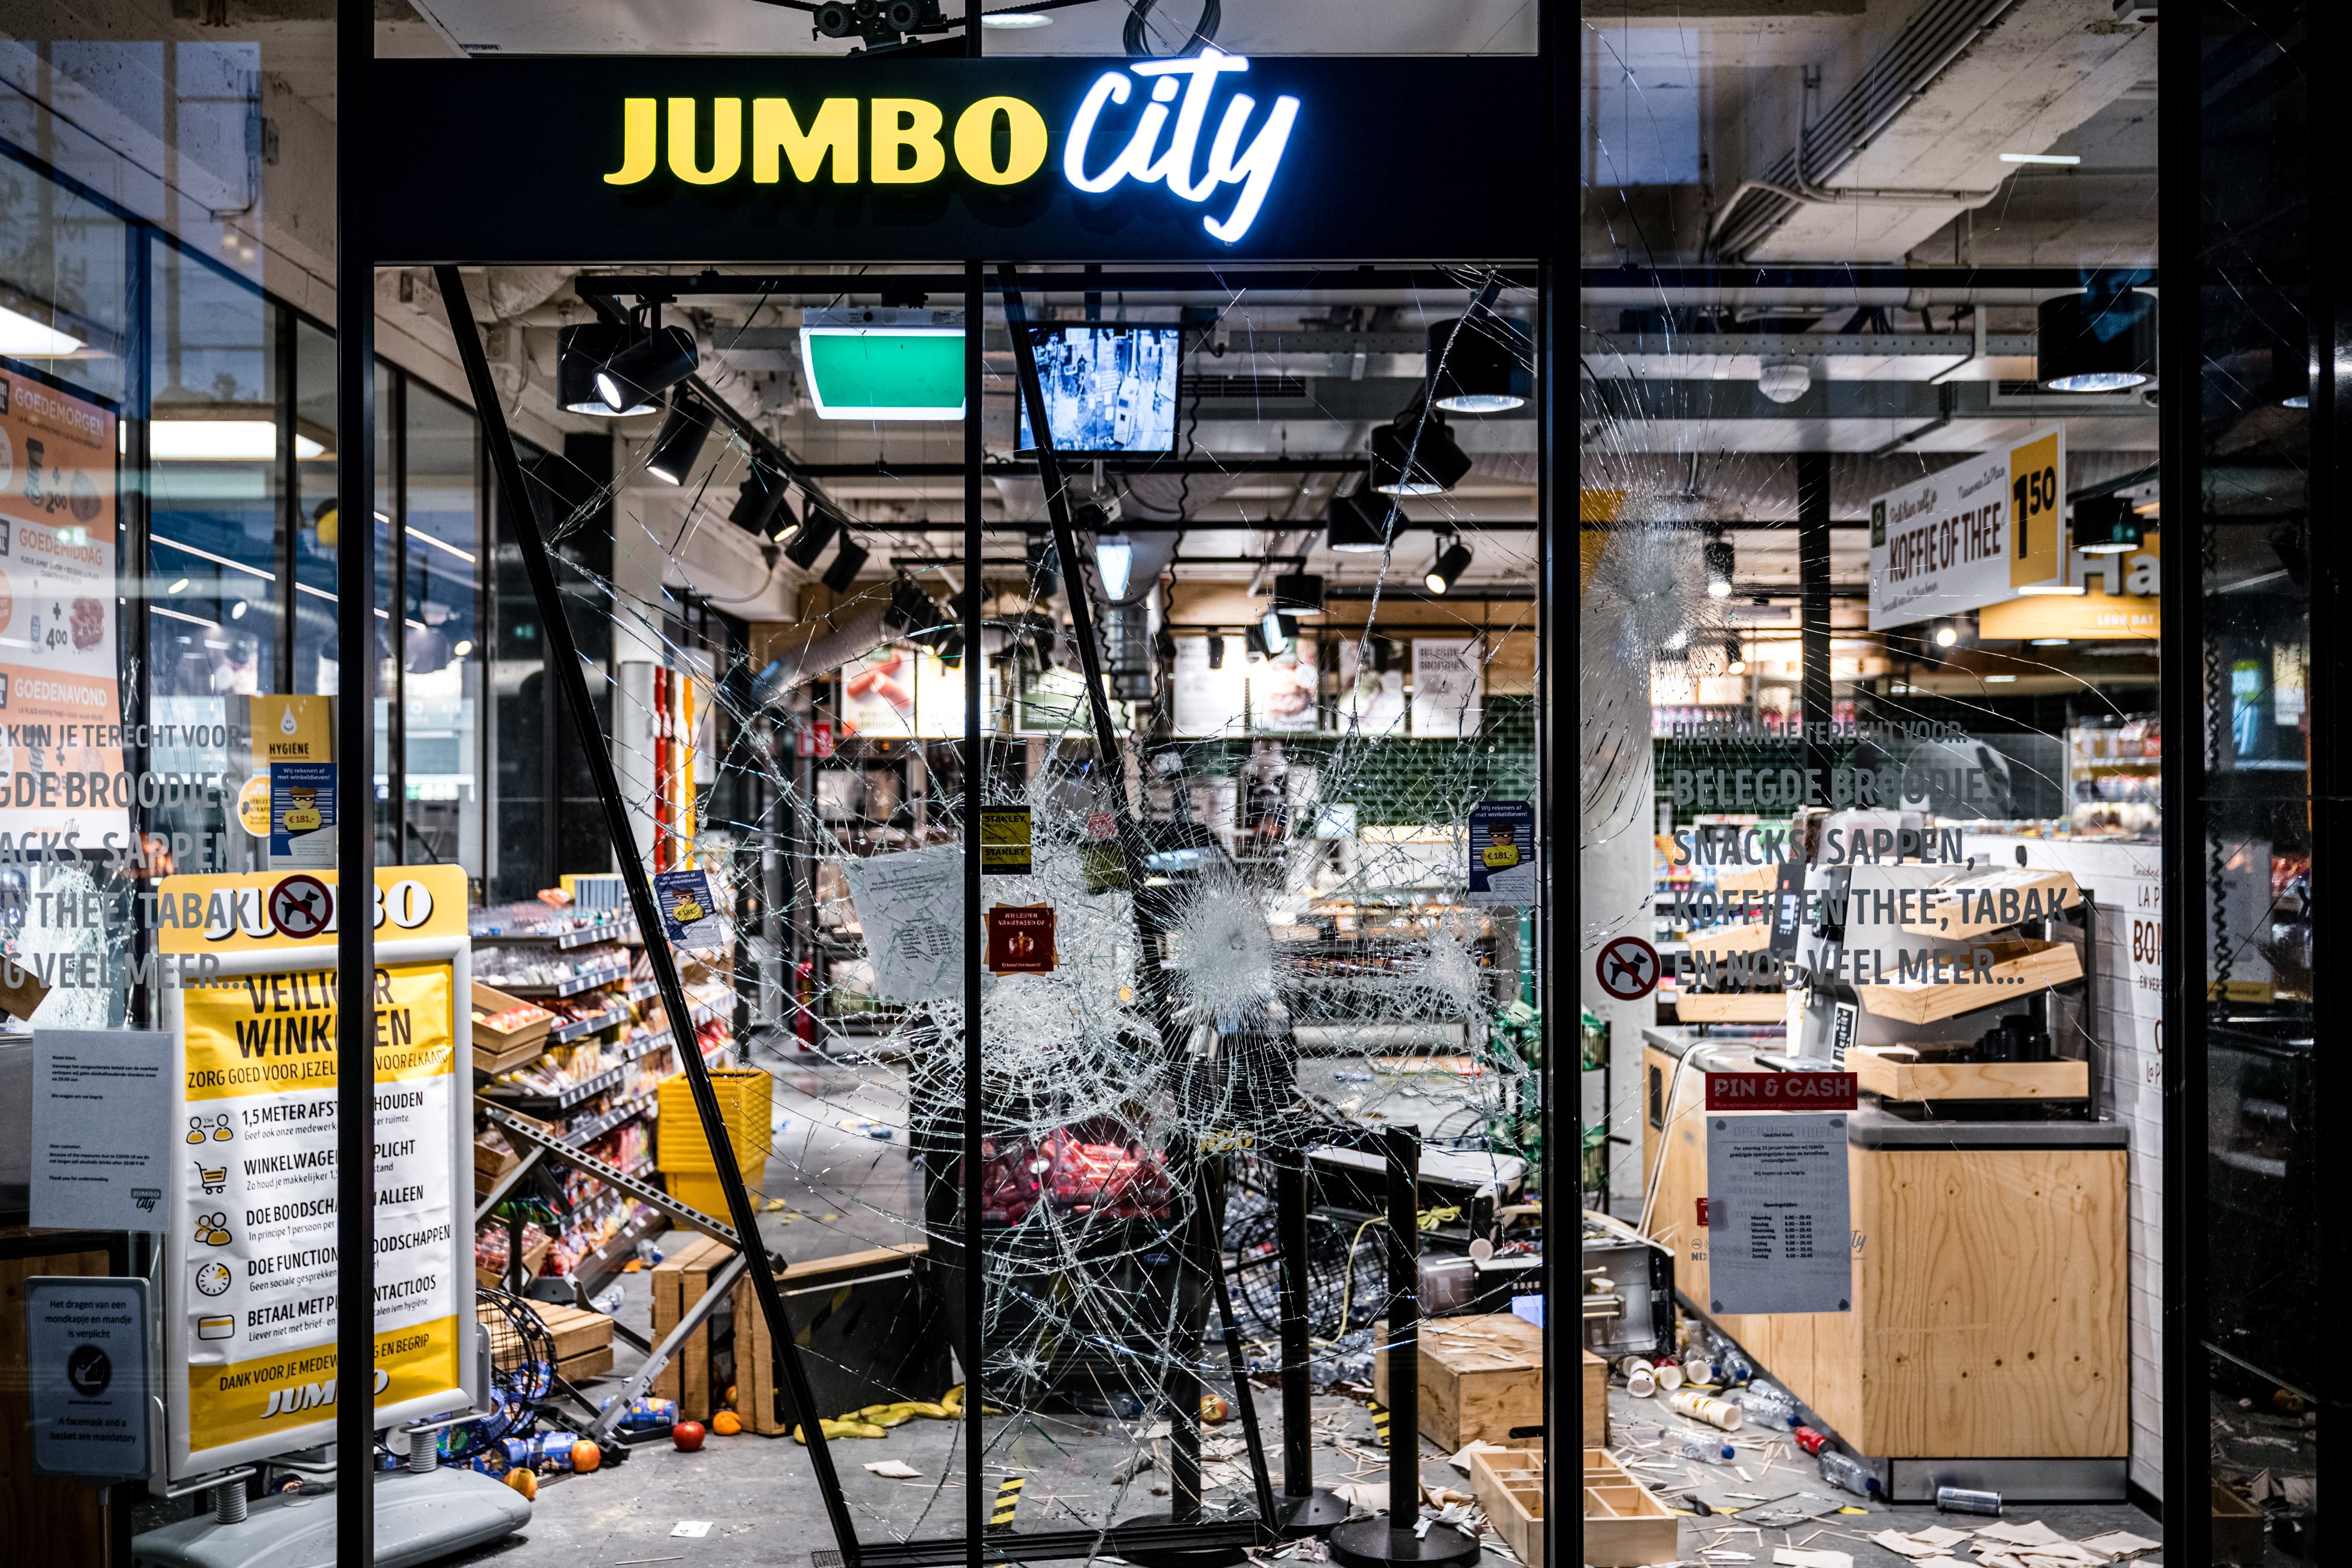 Photo of a shop that has been looted and destroyed